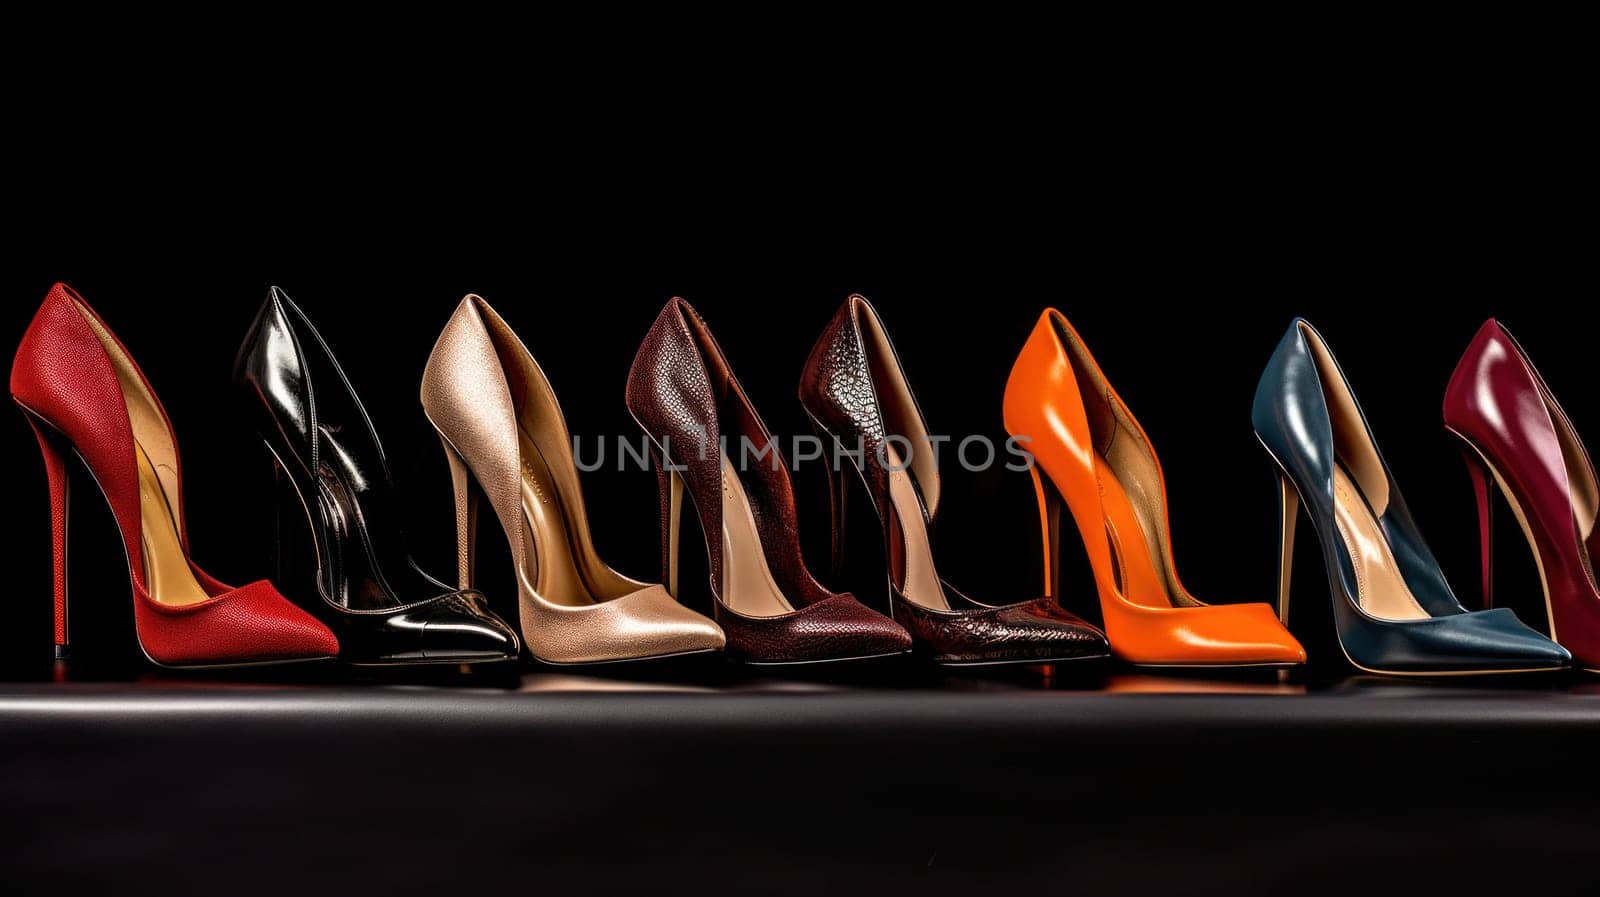 A row of high heeled shoes lined up on a black surface